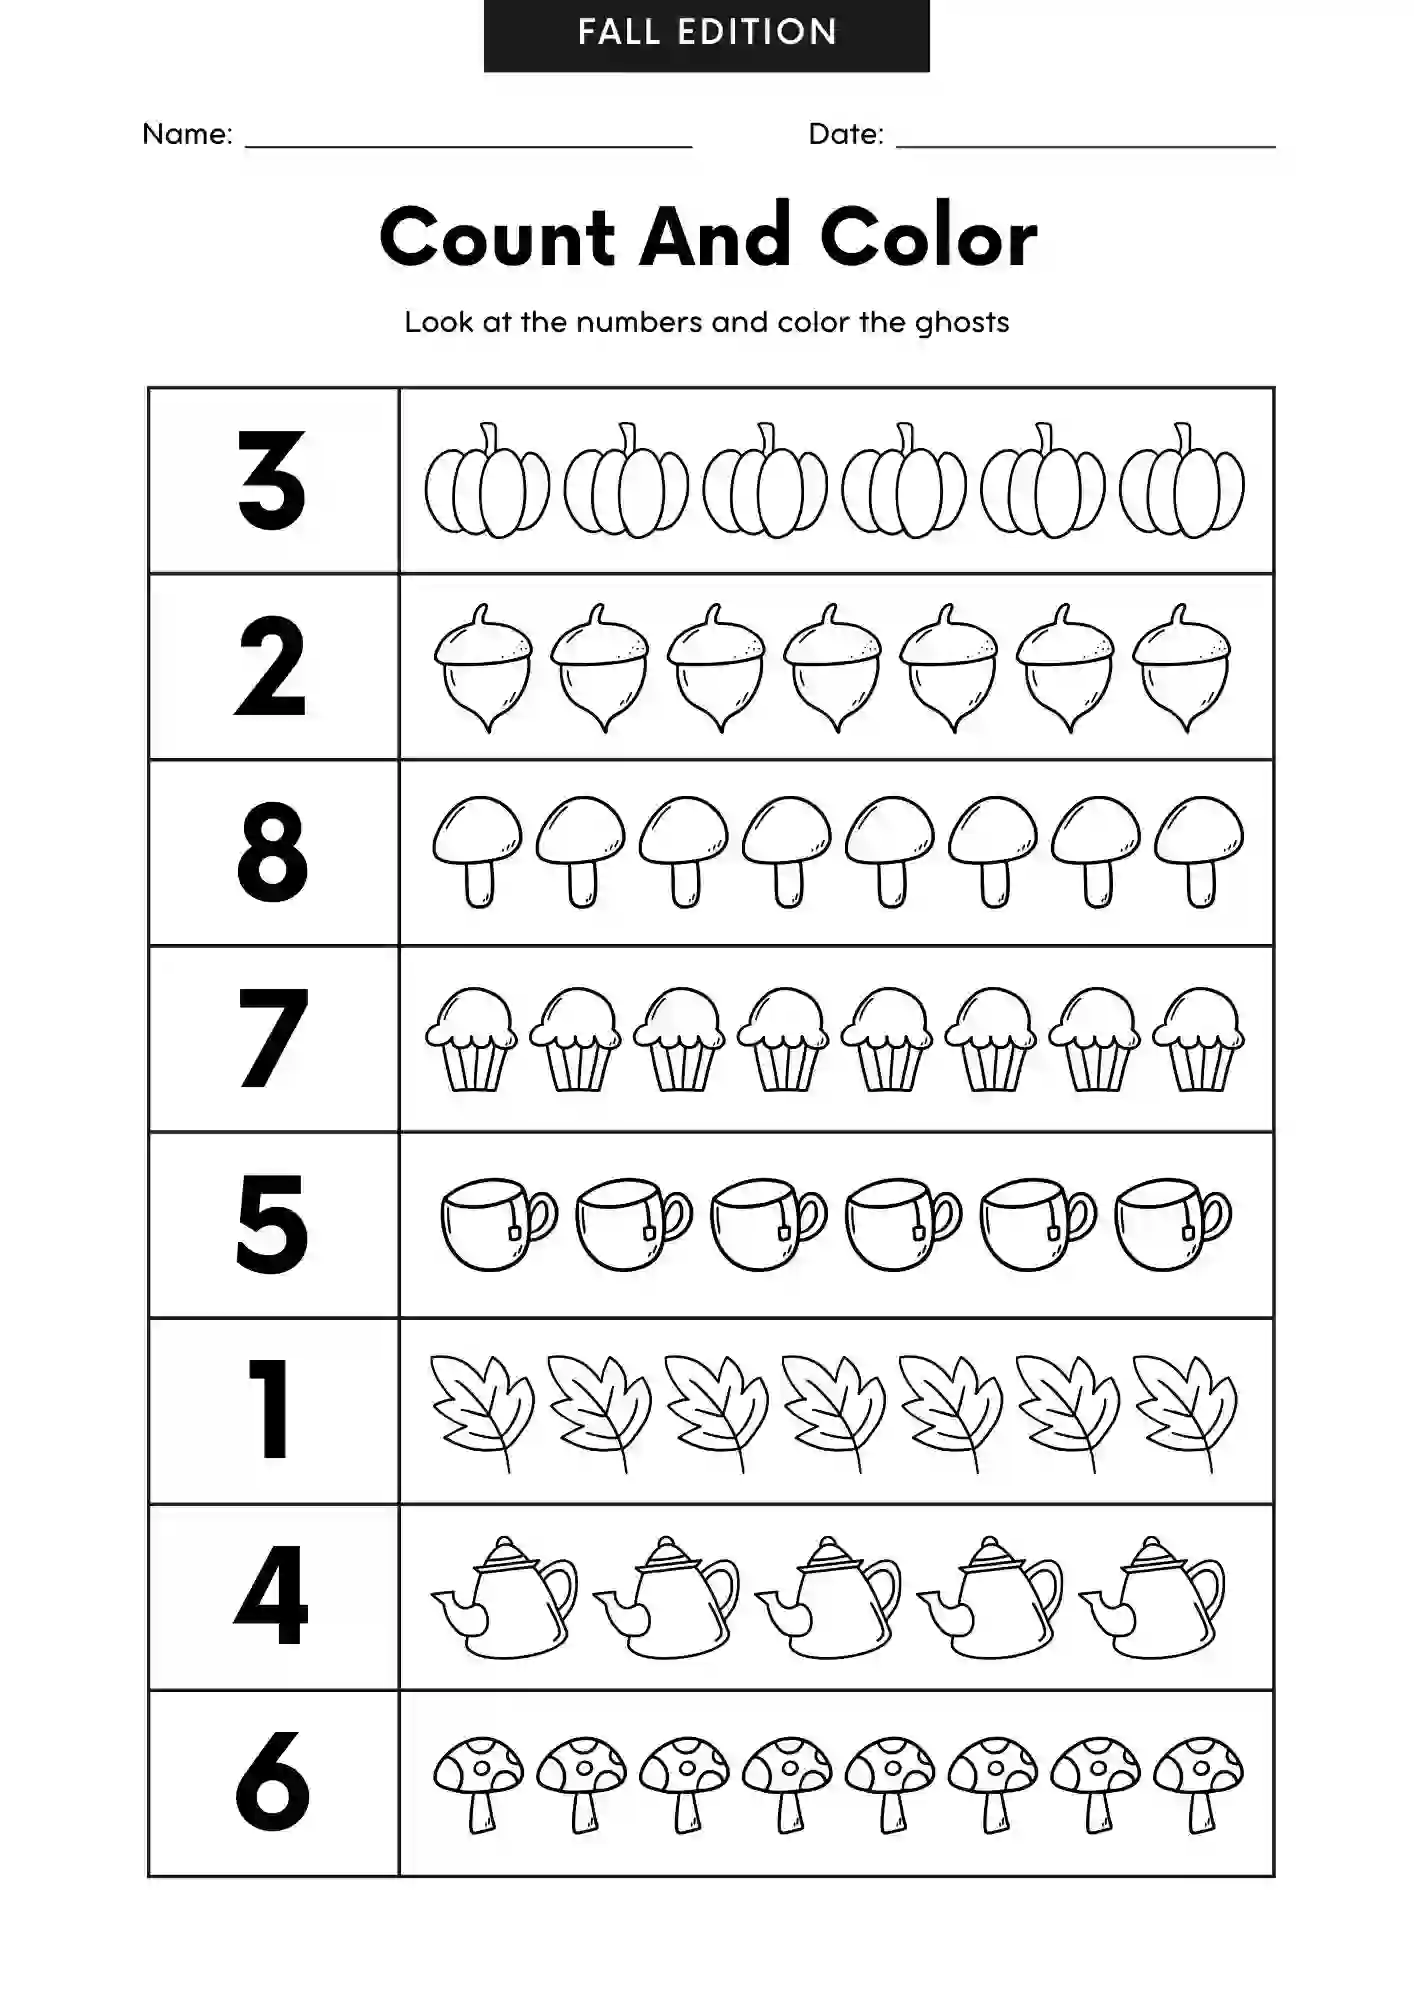 Count And Color Worksheets